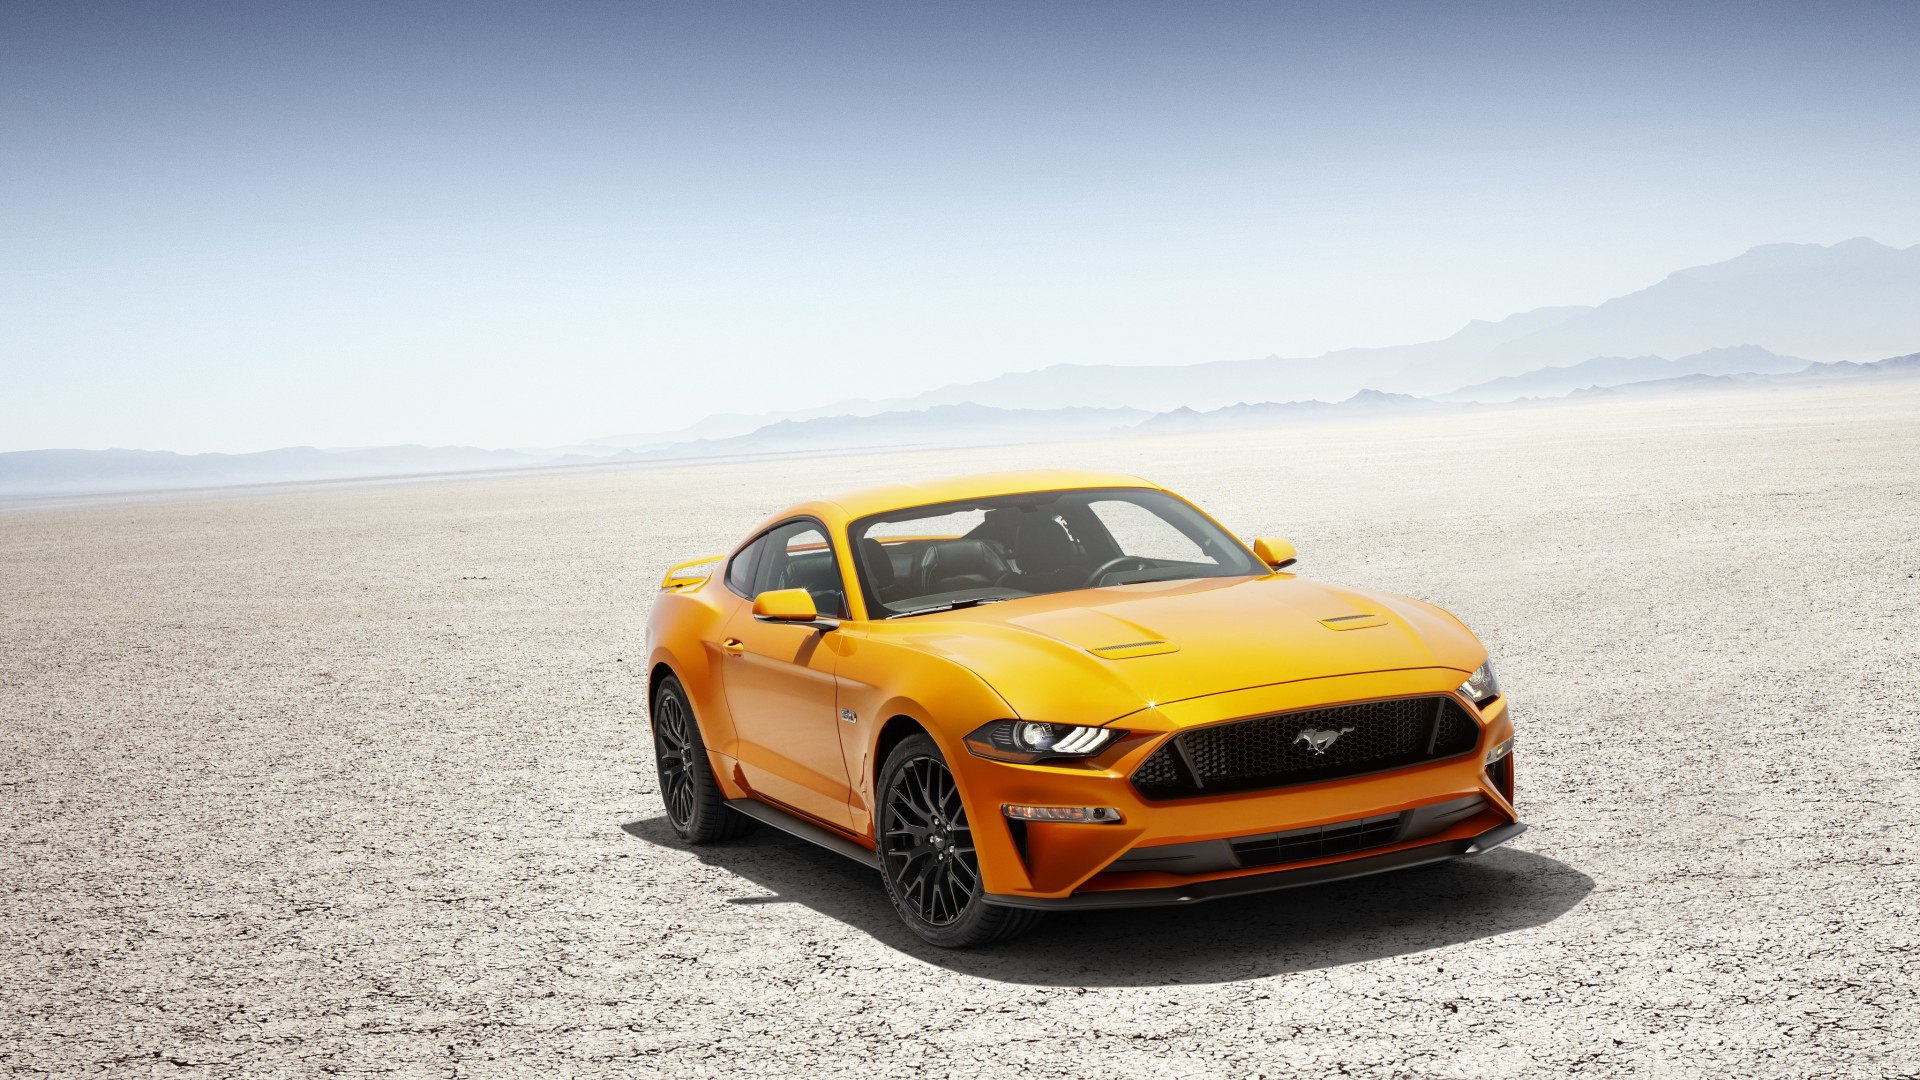 Download 1920x1080 Ford Mustang, Yellow, Desert, Muscle, Cars Wallpaper for Widescreen